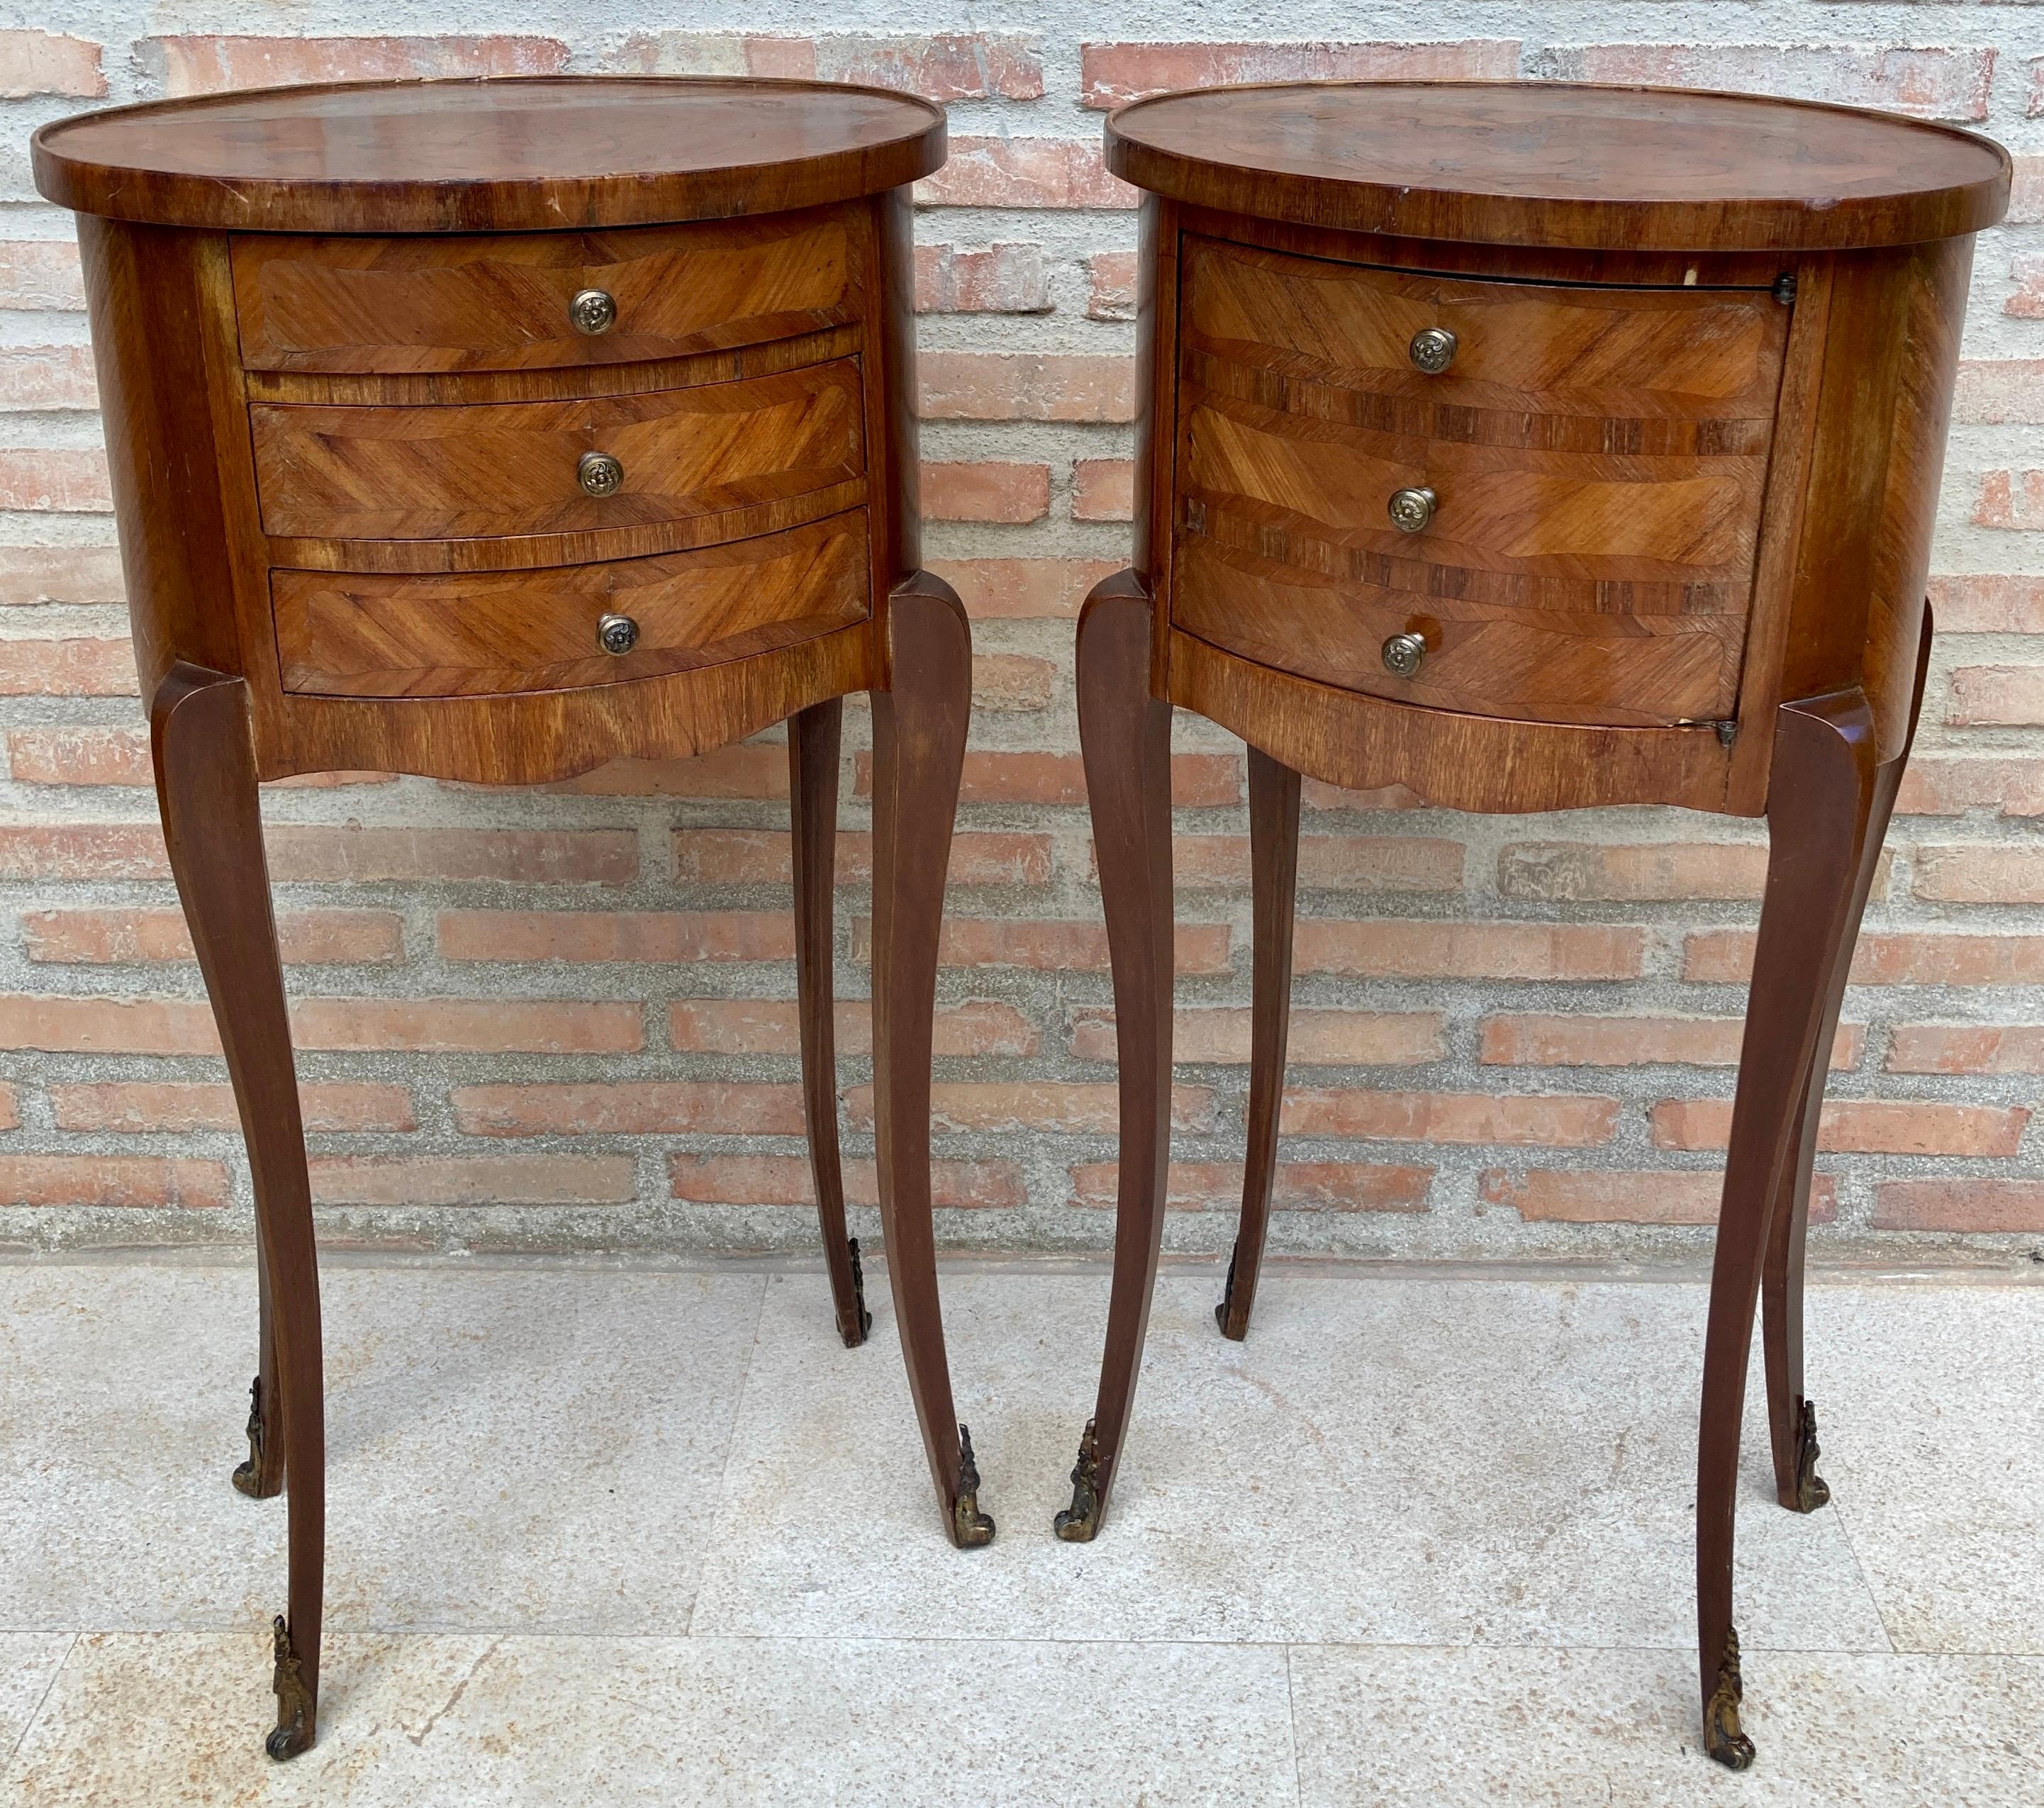 Two beautiful French, walnut side tables with Louis XVI style inlays made in the early 20th century. They are raised on four elegant feet topped with bronze decoration and one table has three front drawers with brass handles and the other a front